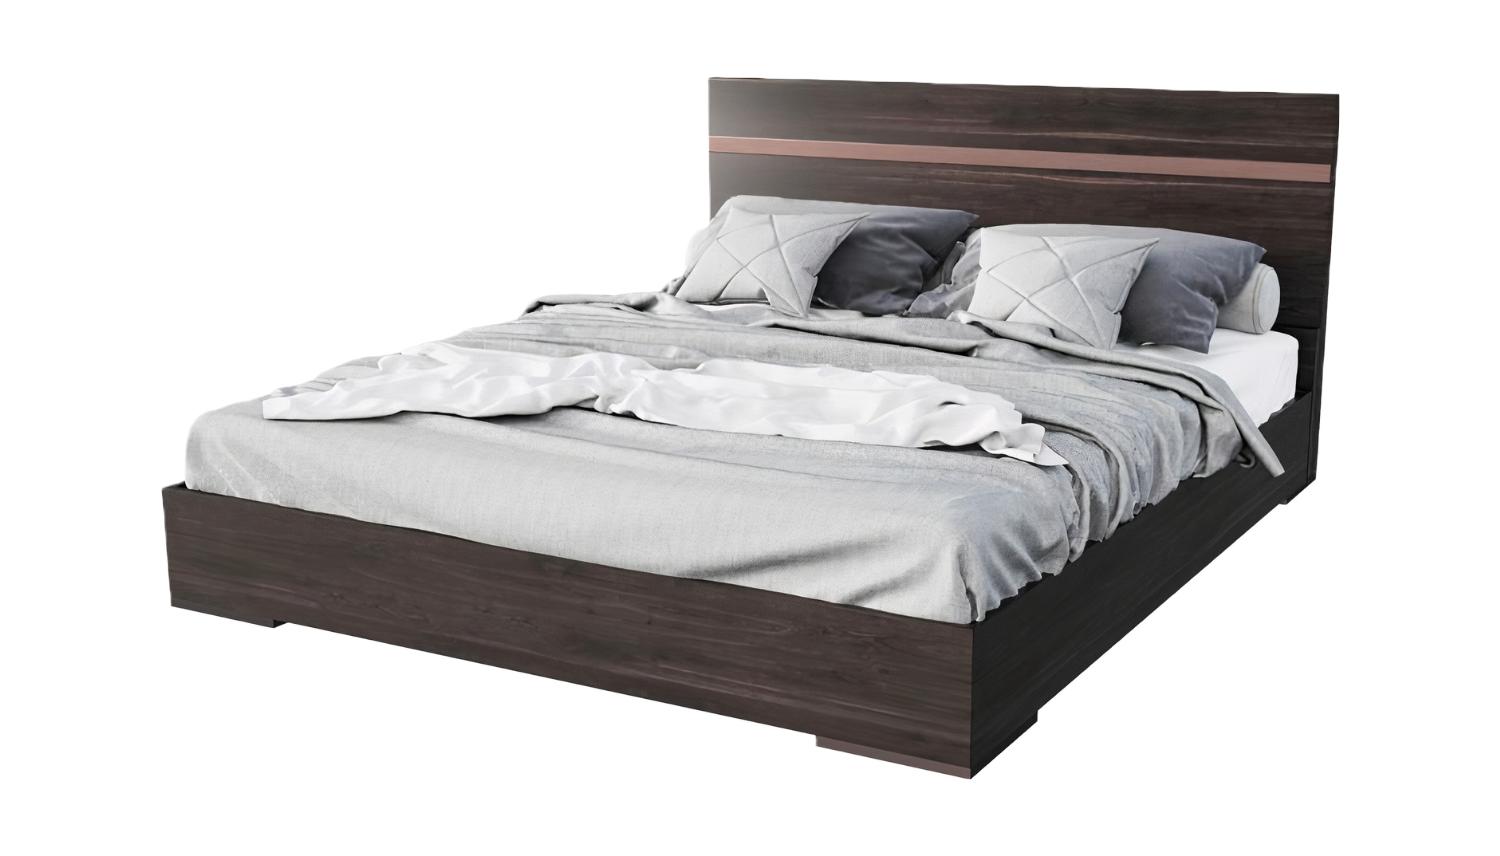 

    
Dark Oak & Stainless Steel Accents King Panel Bed by VIG Nova Domus Benzon
